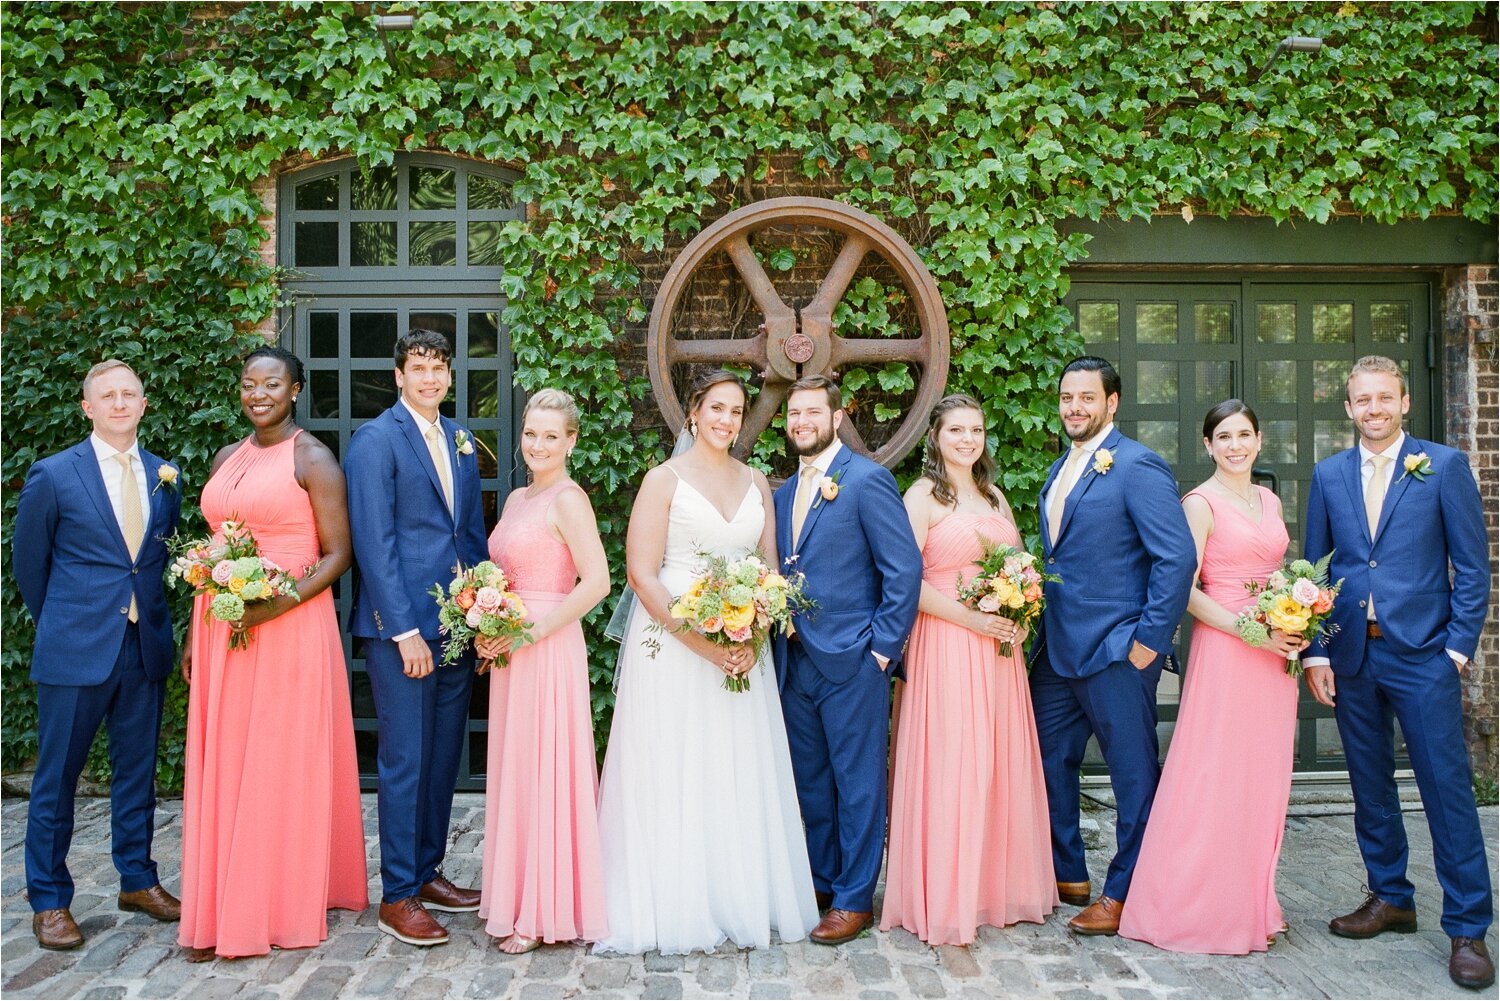 Bridal Party Photos at The Foundry